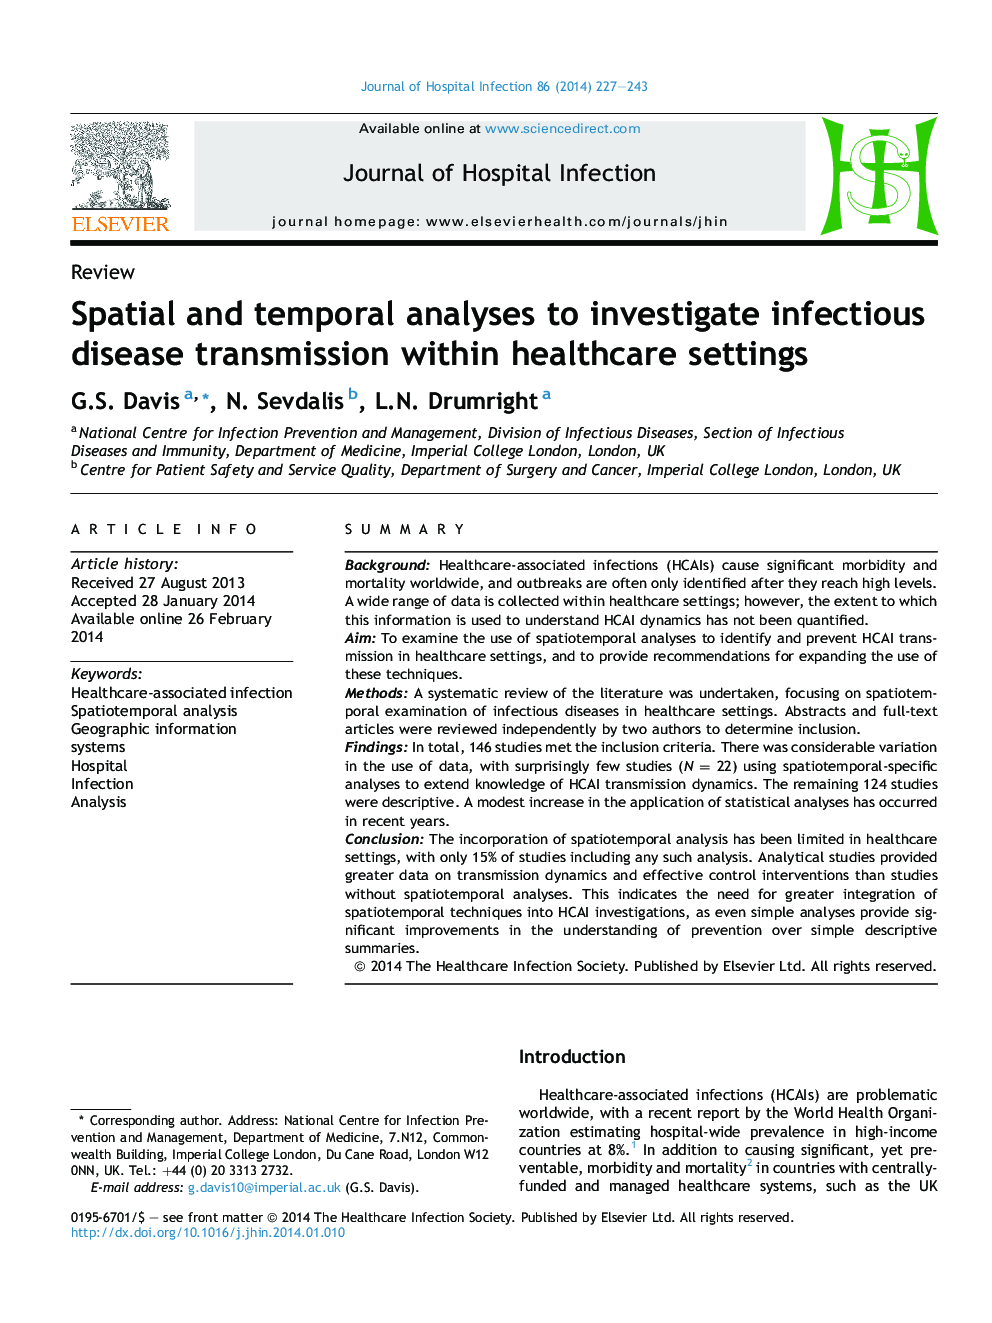 Spatial and temporal analyses to investigate infectious disease transmission within healthcare settings